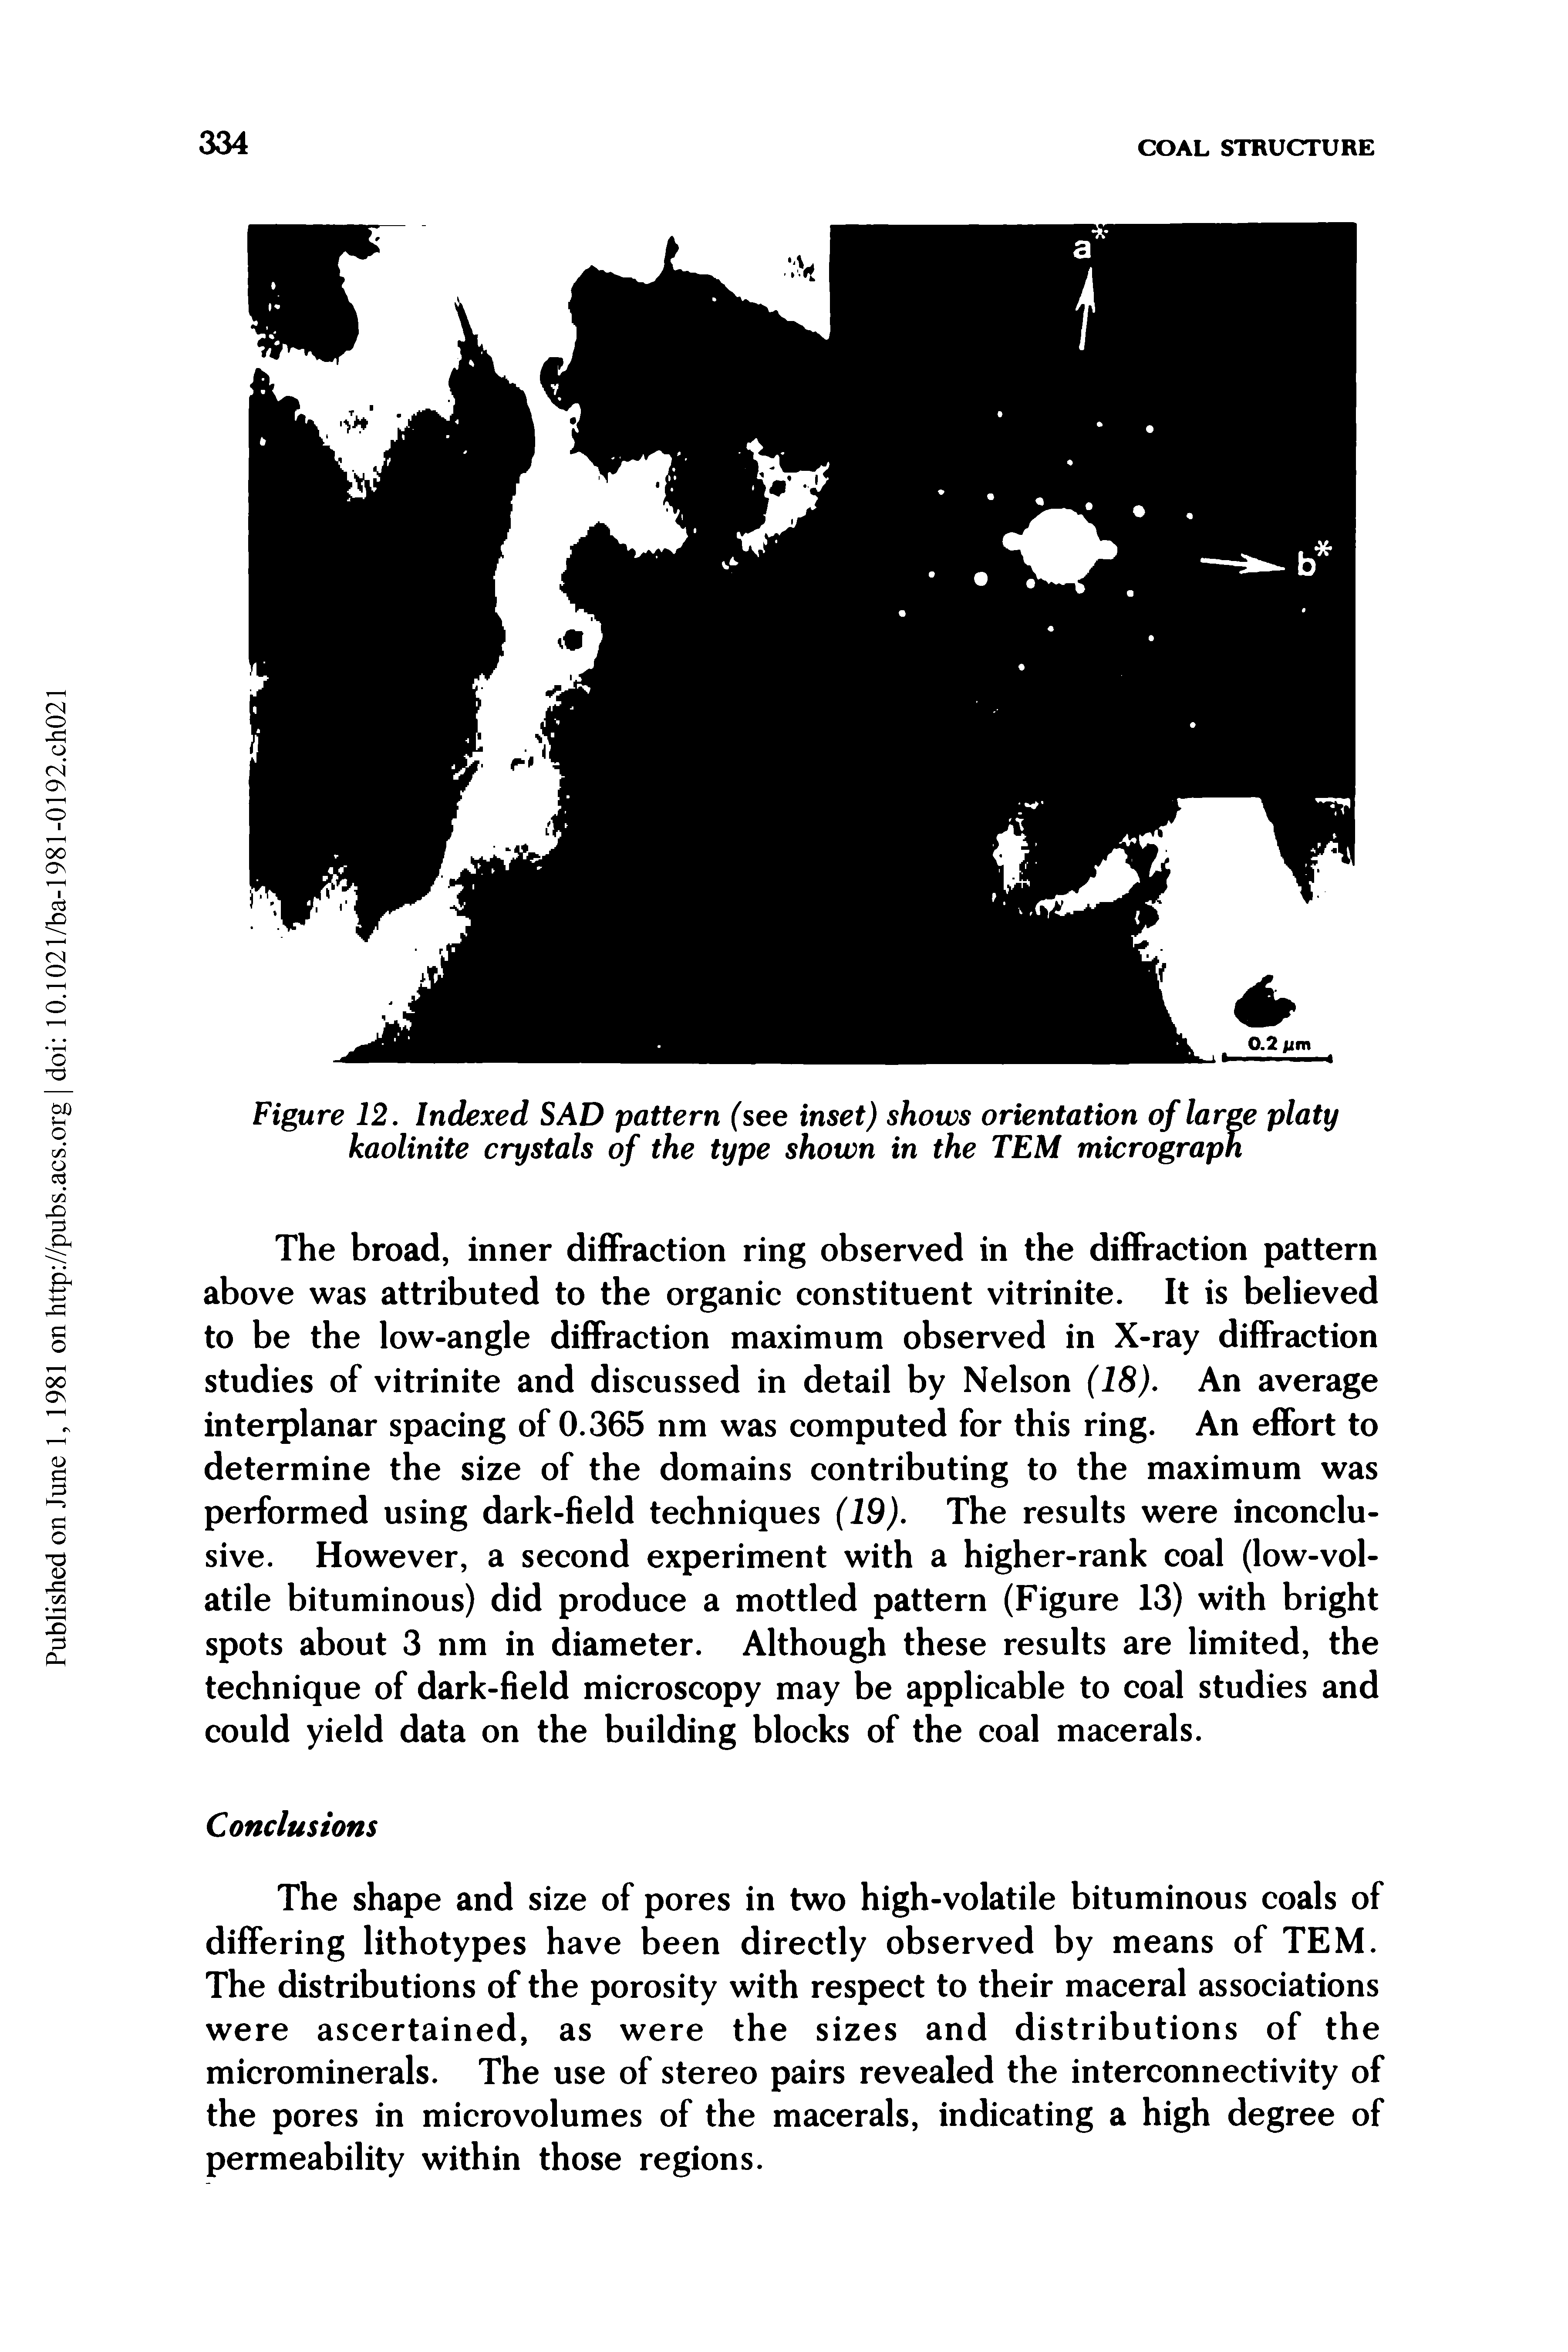 Figure 12. Indexed SAD pattern (see inset) shows orientation of large platy kaolinite crystals of the type shown in the TEM micrograph...